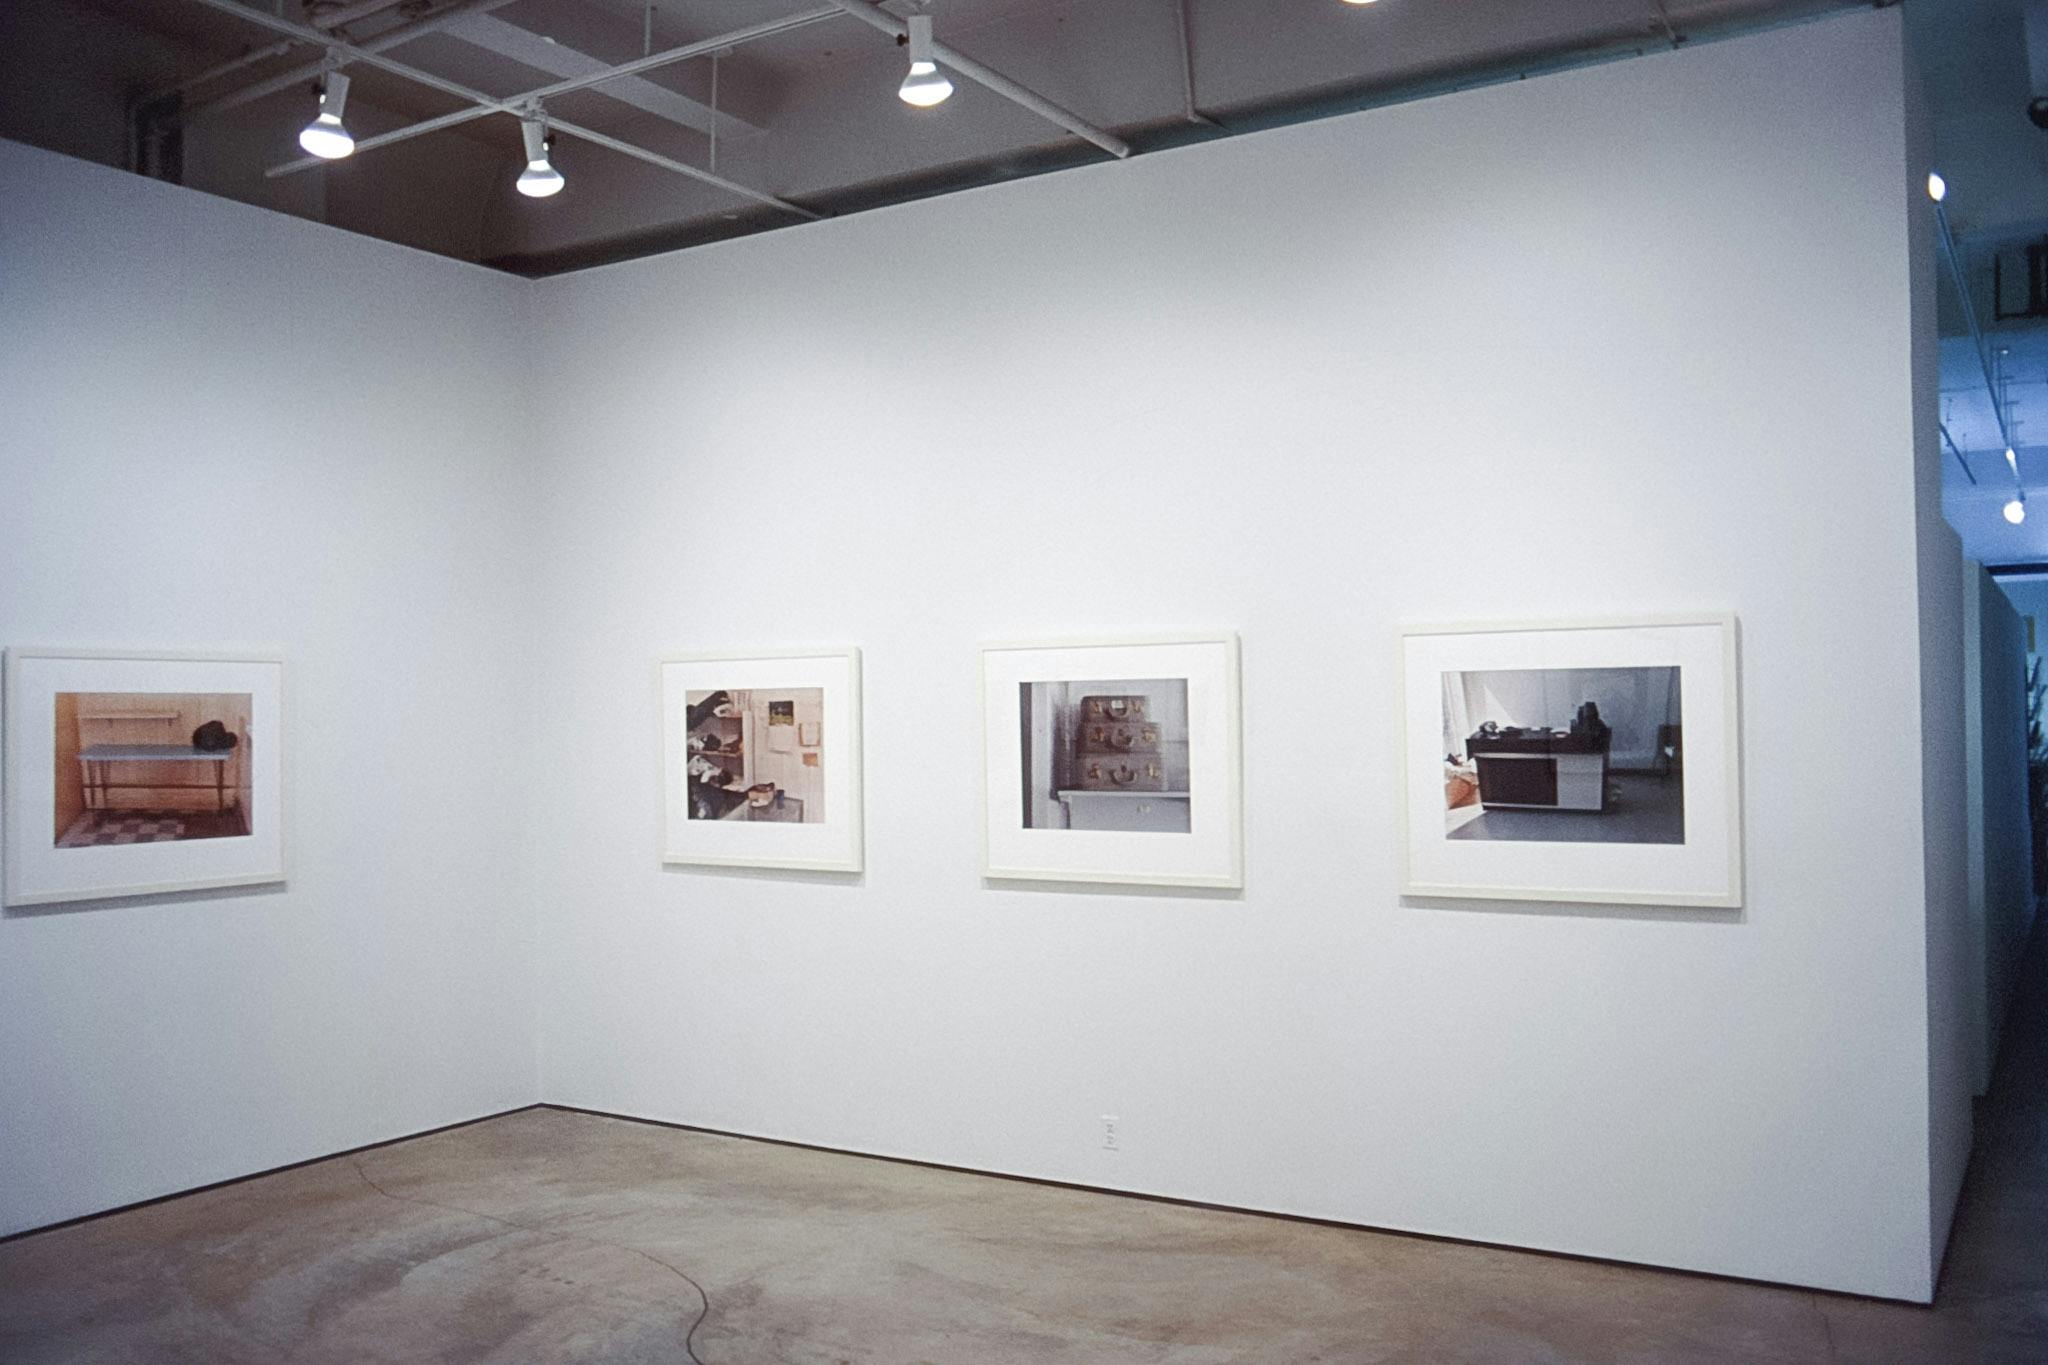 Four coloured photo pieces are mounted on the gallery walls. All of them depict items placed in white rooms. A microwave, suitcases, shelves, and benches are captured in these photographs. 